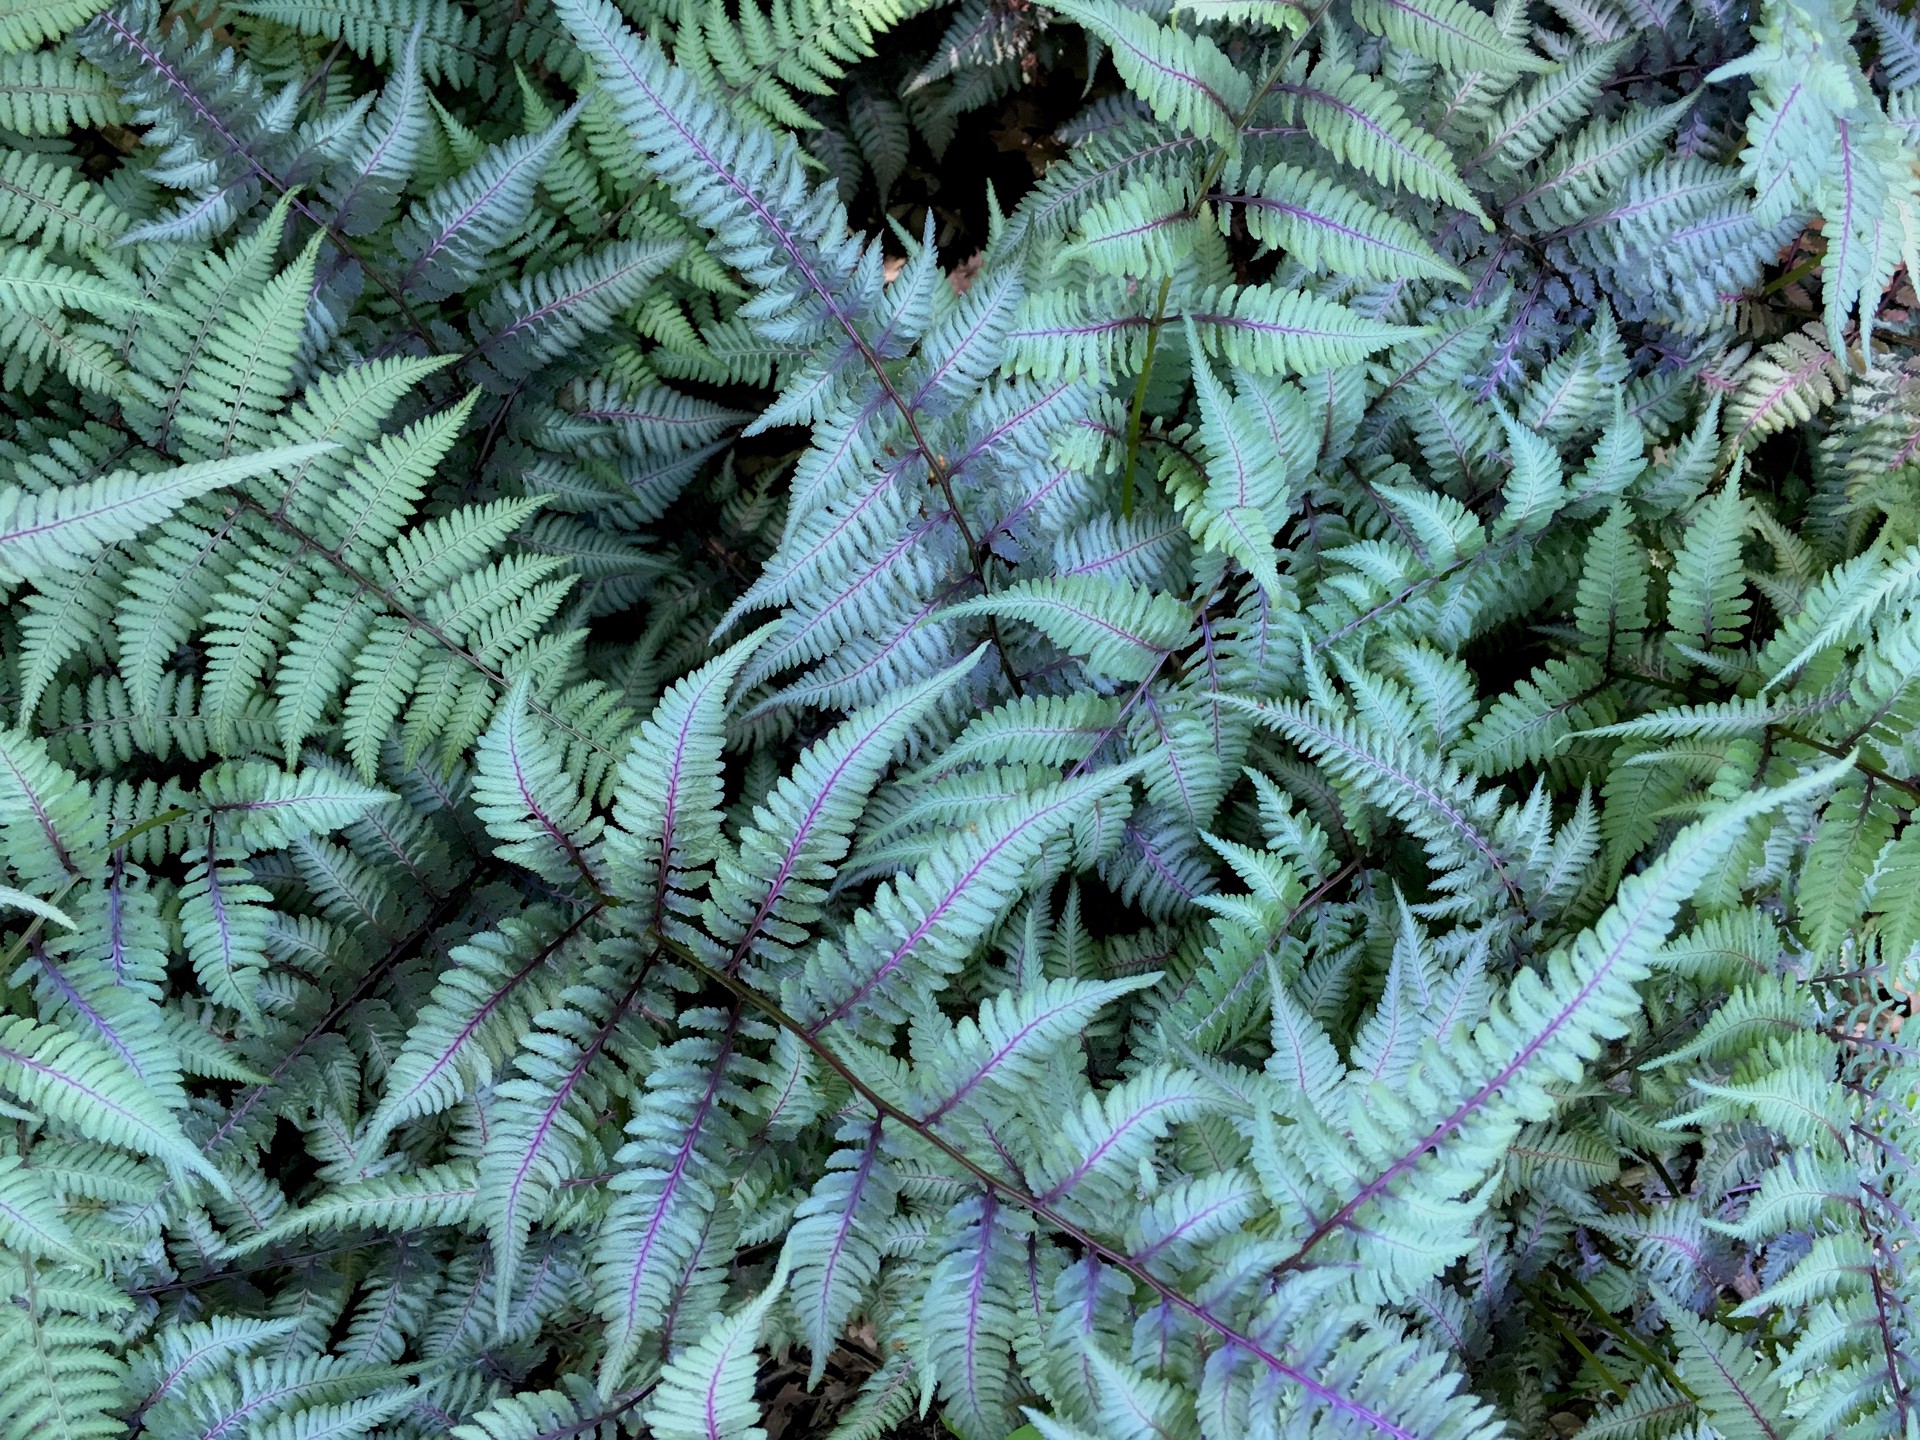 Japanese Painted Ferns by Amy Kaslow